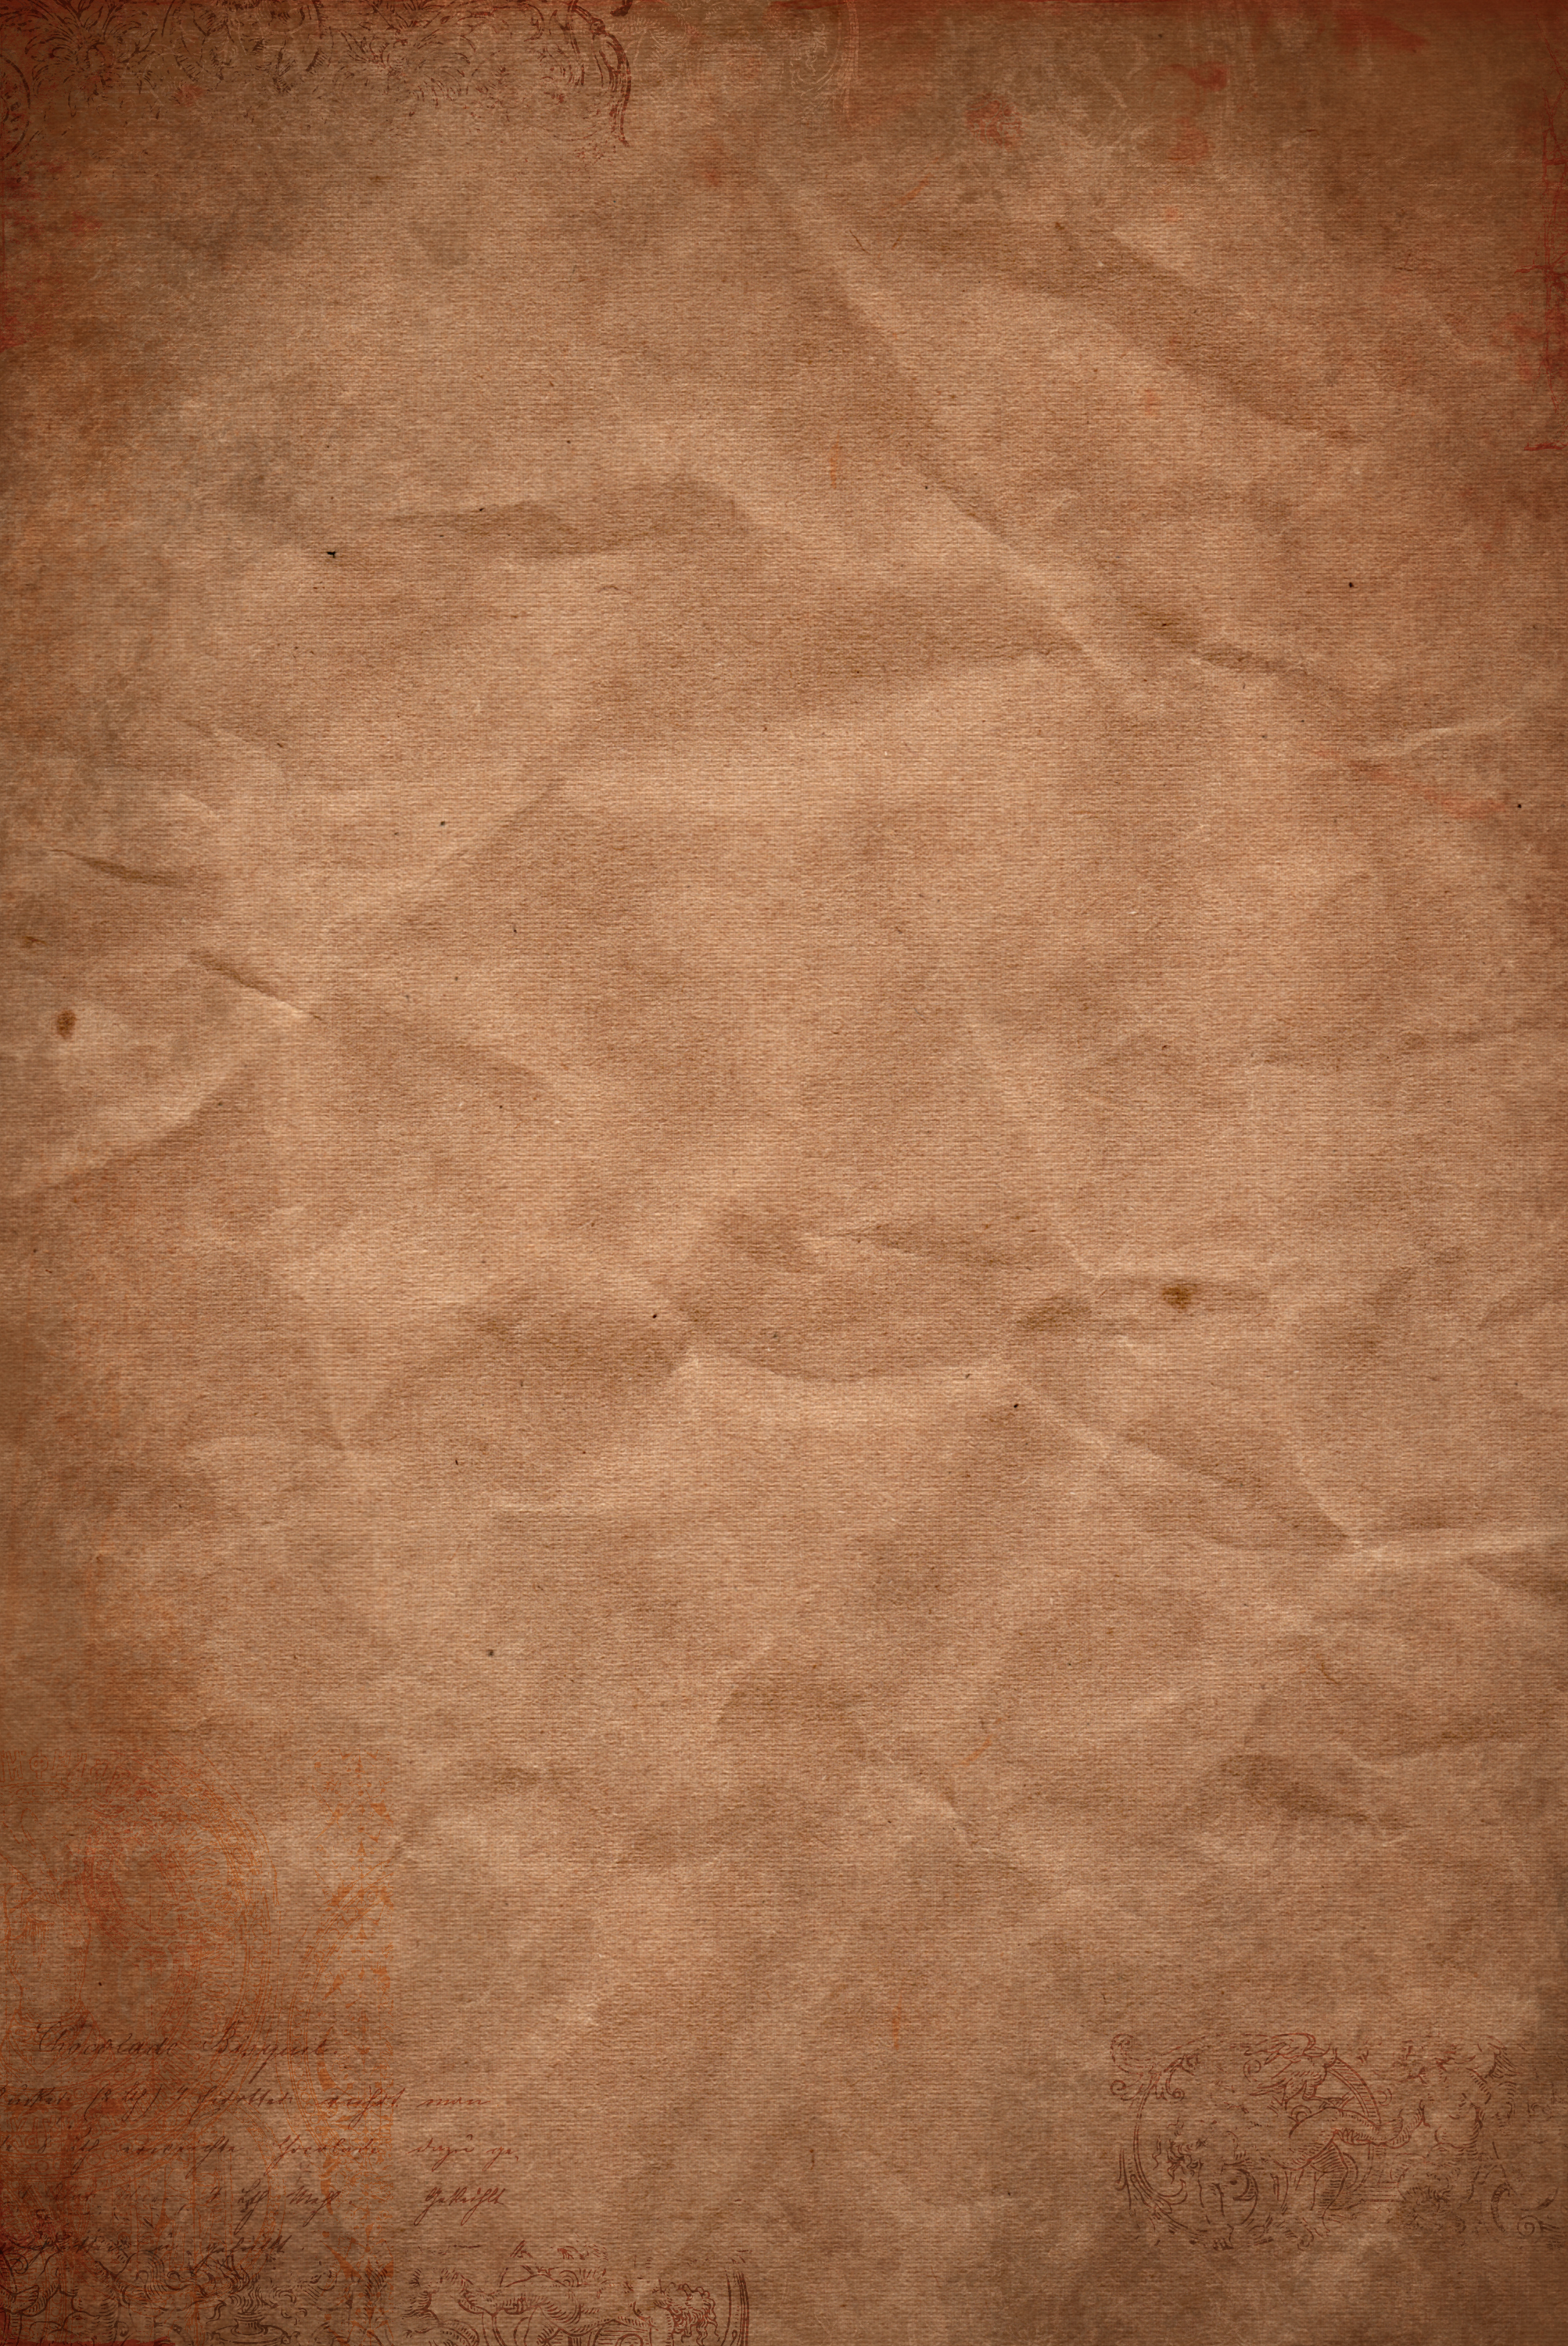 Brown old paper texture, background